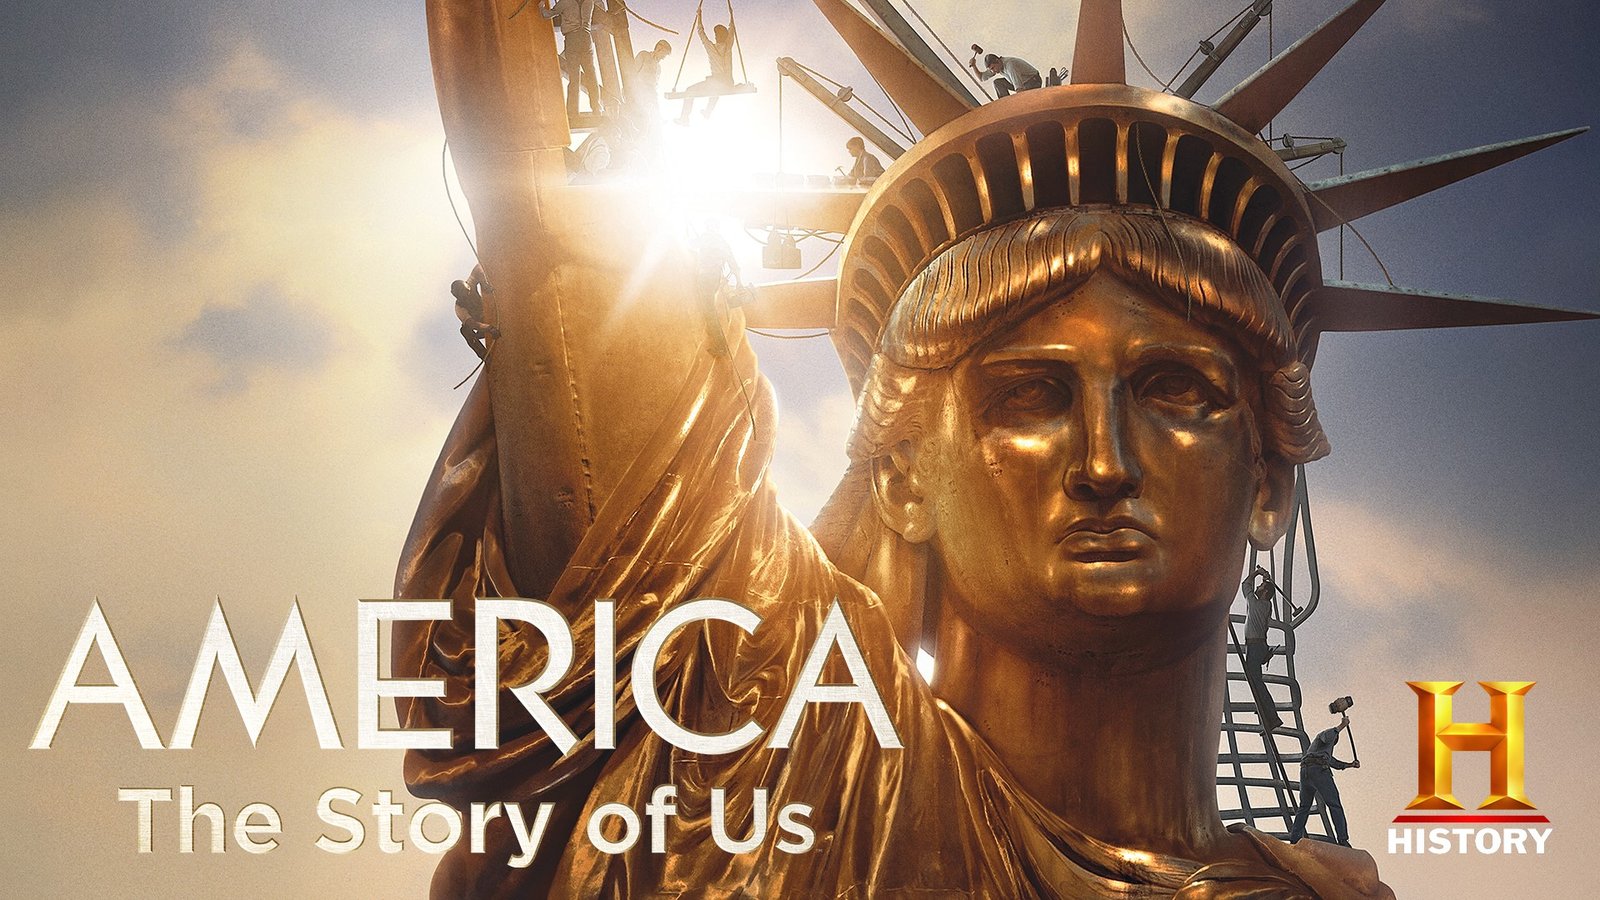 America the Story of Us